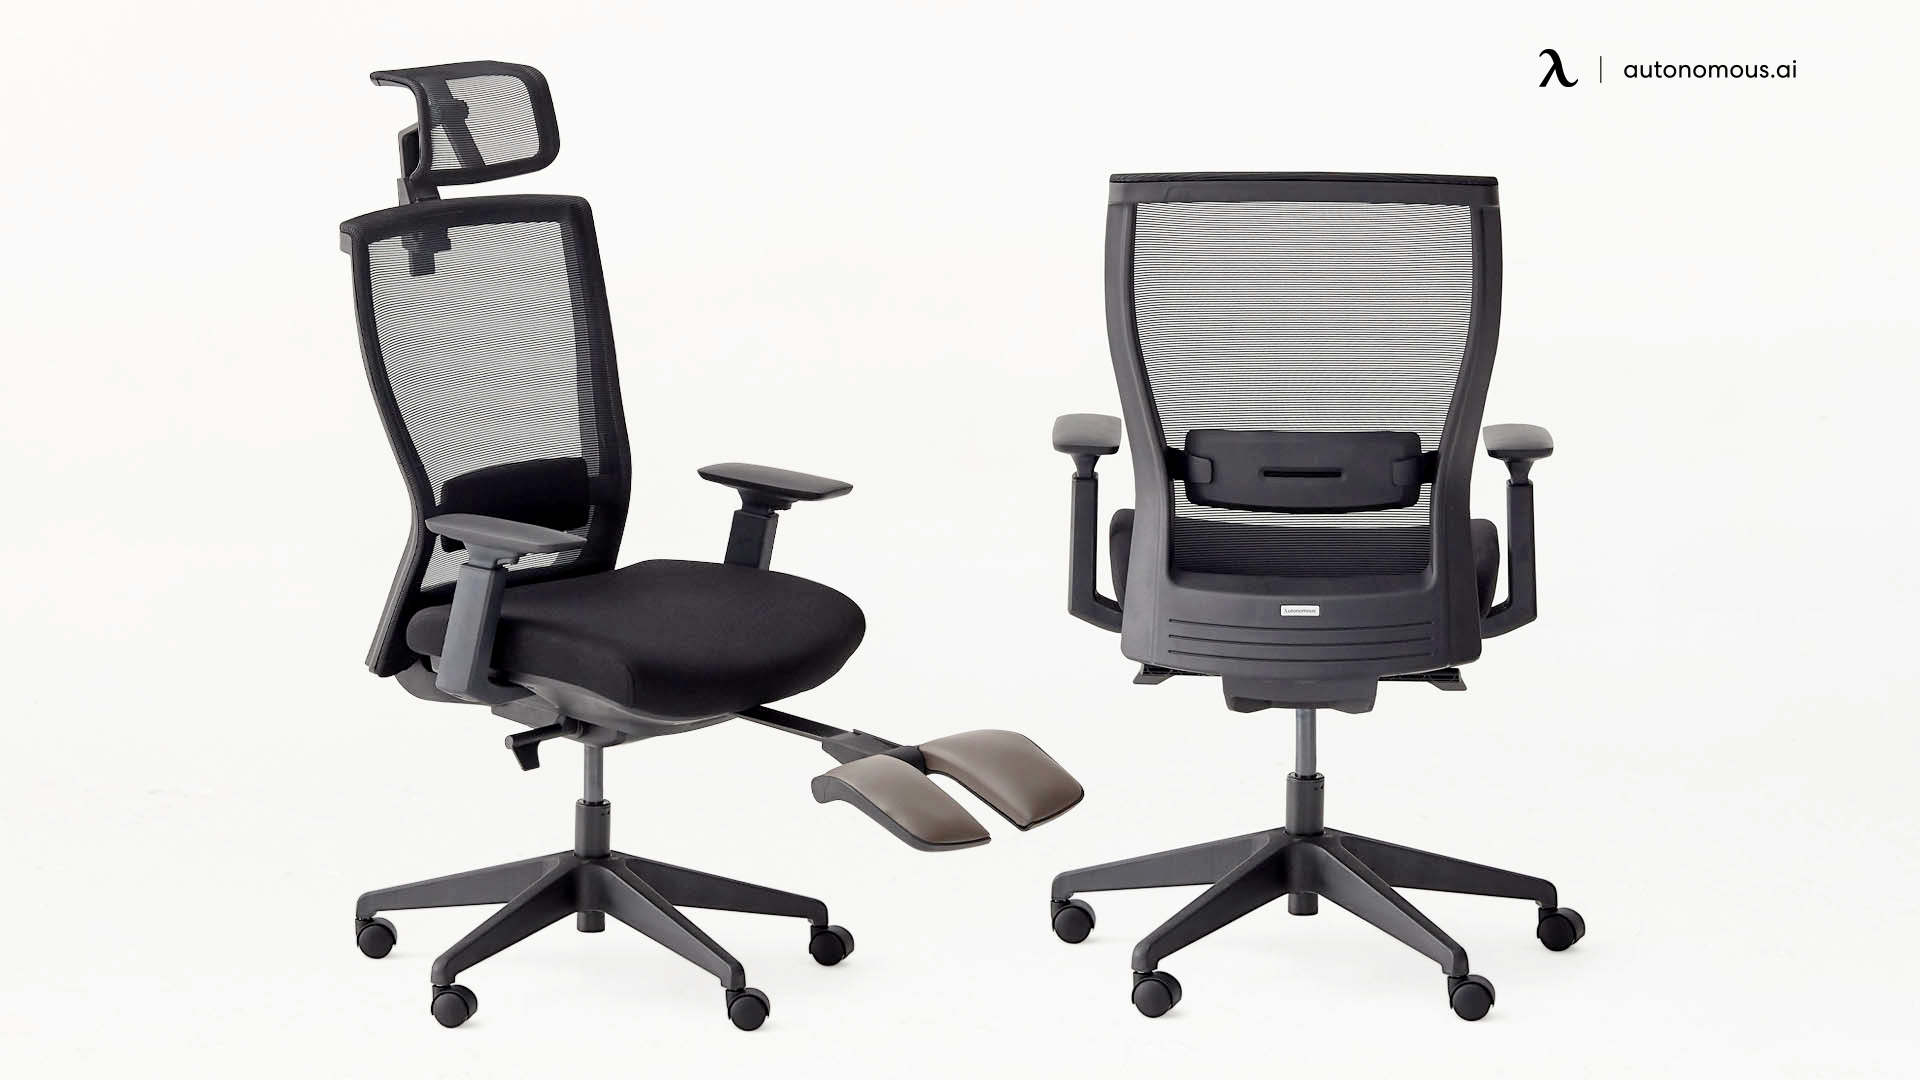 ErgoChair Recline best chair for lower back and hip pain